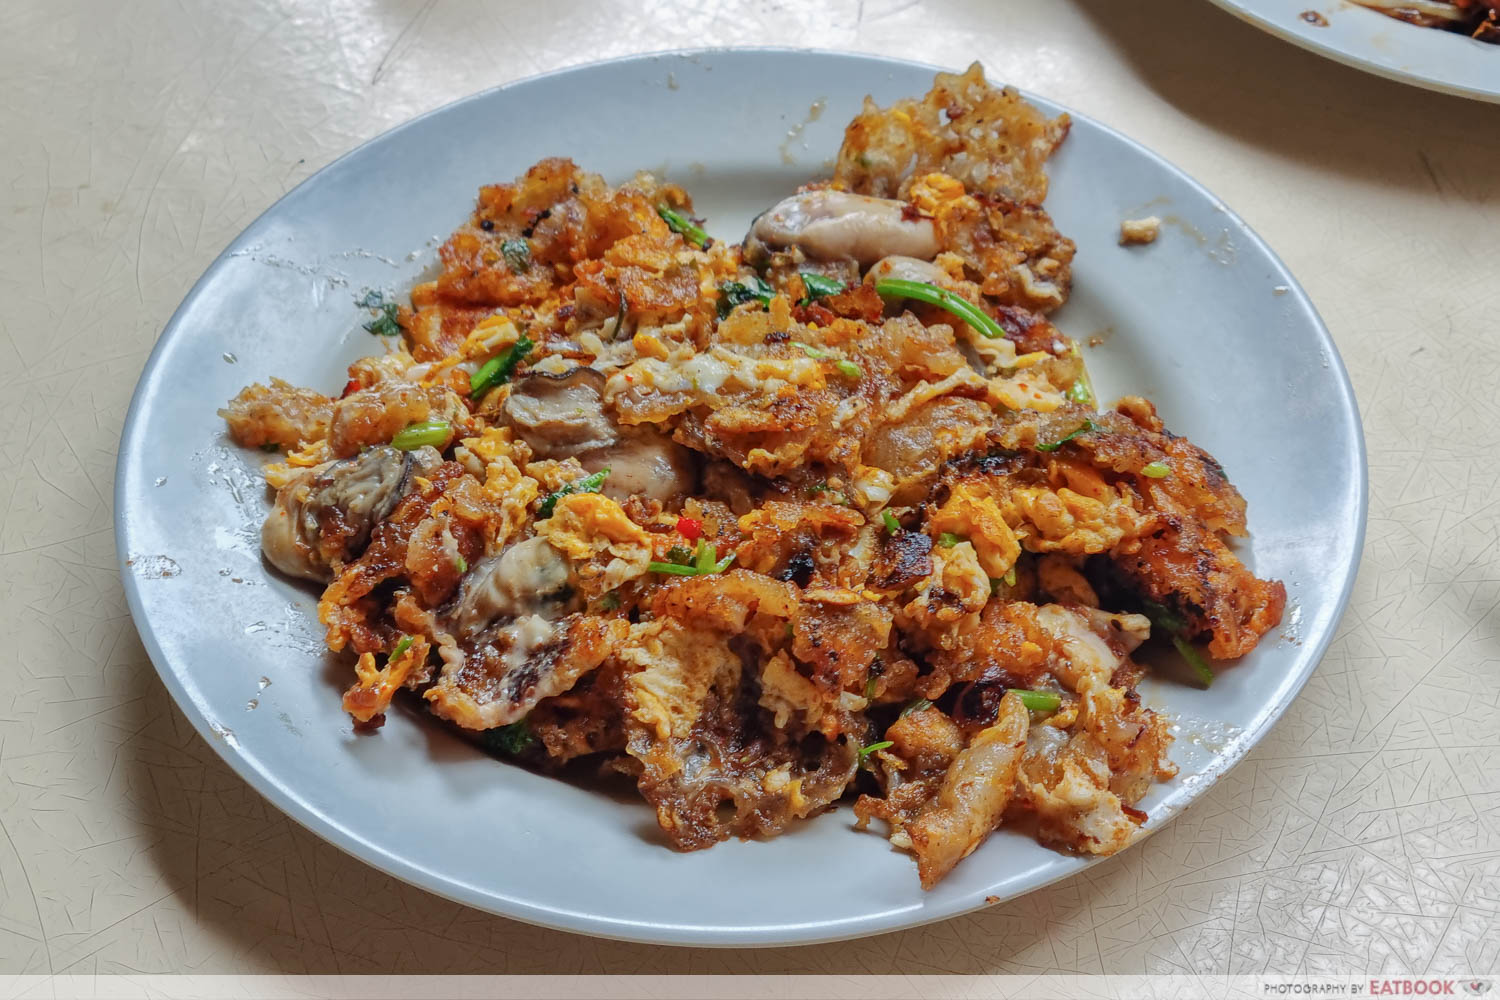 hougang-oyster-omelette-&-fried-kway-teow-orh-luak